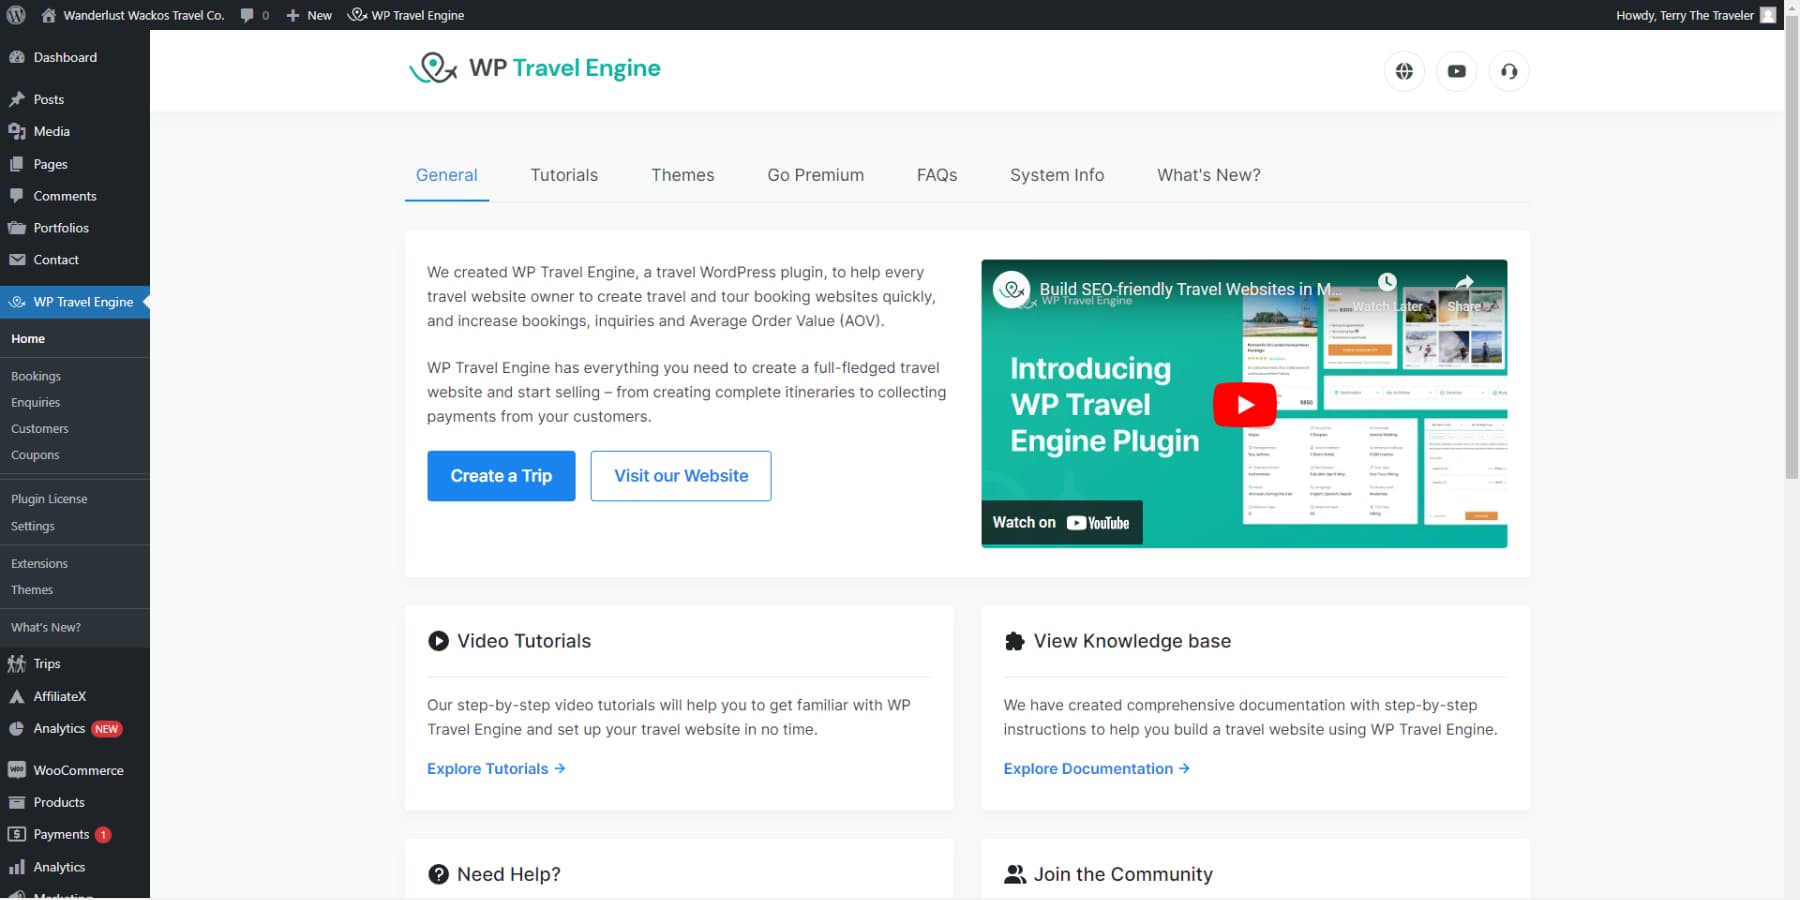 A screenshot of WP Travel Engine's user interface